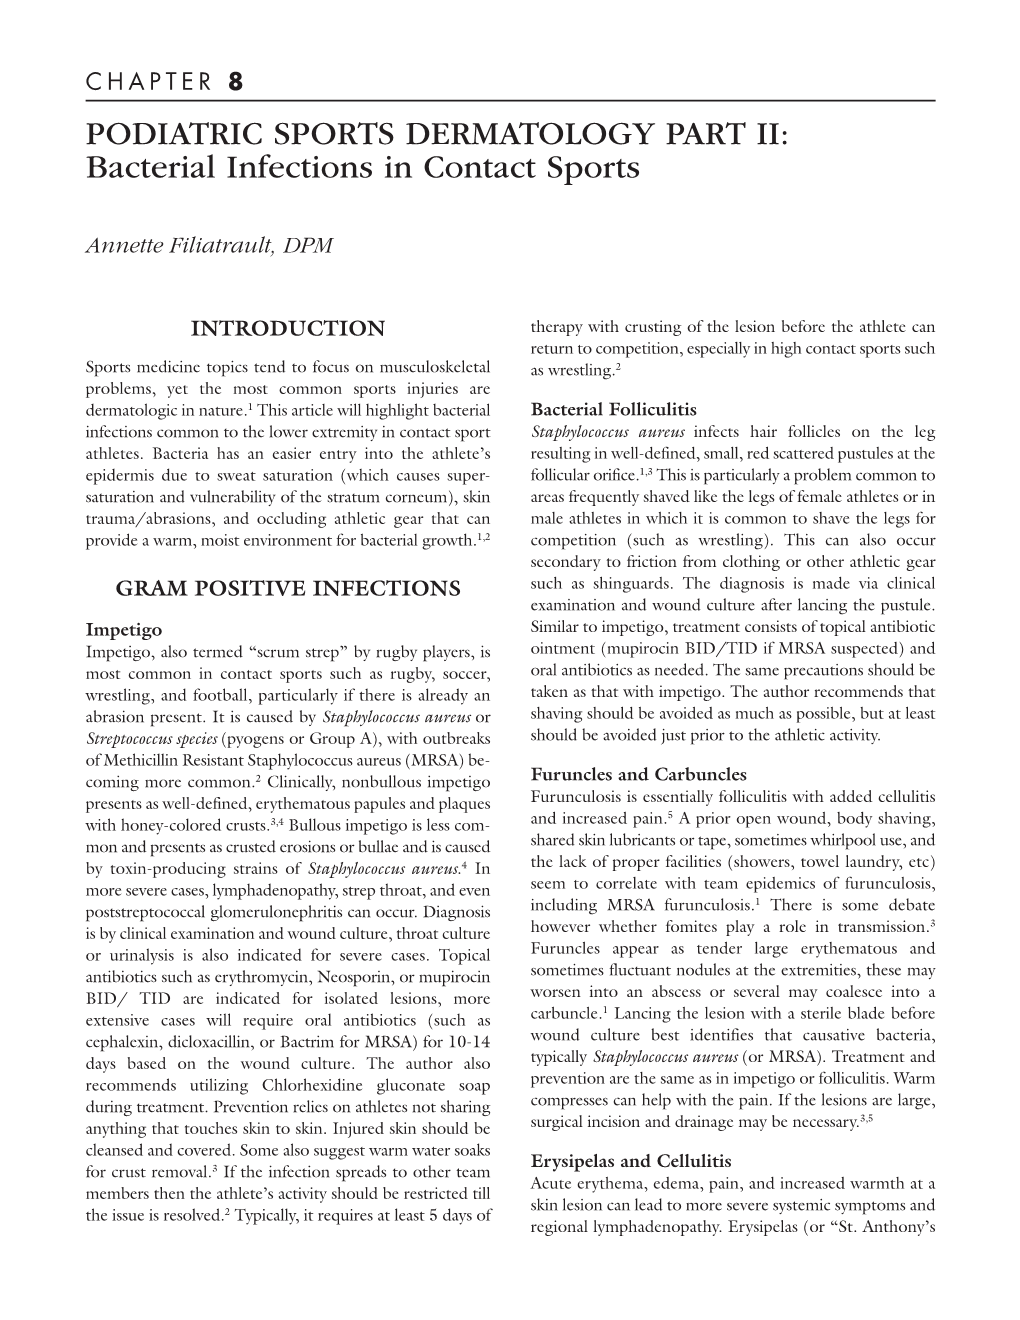 Bacterial Infections in Contact Sports